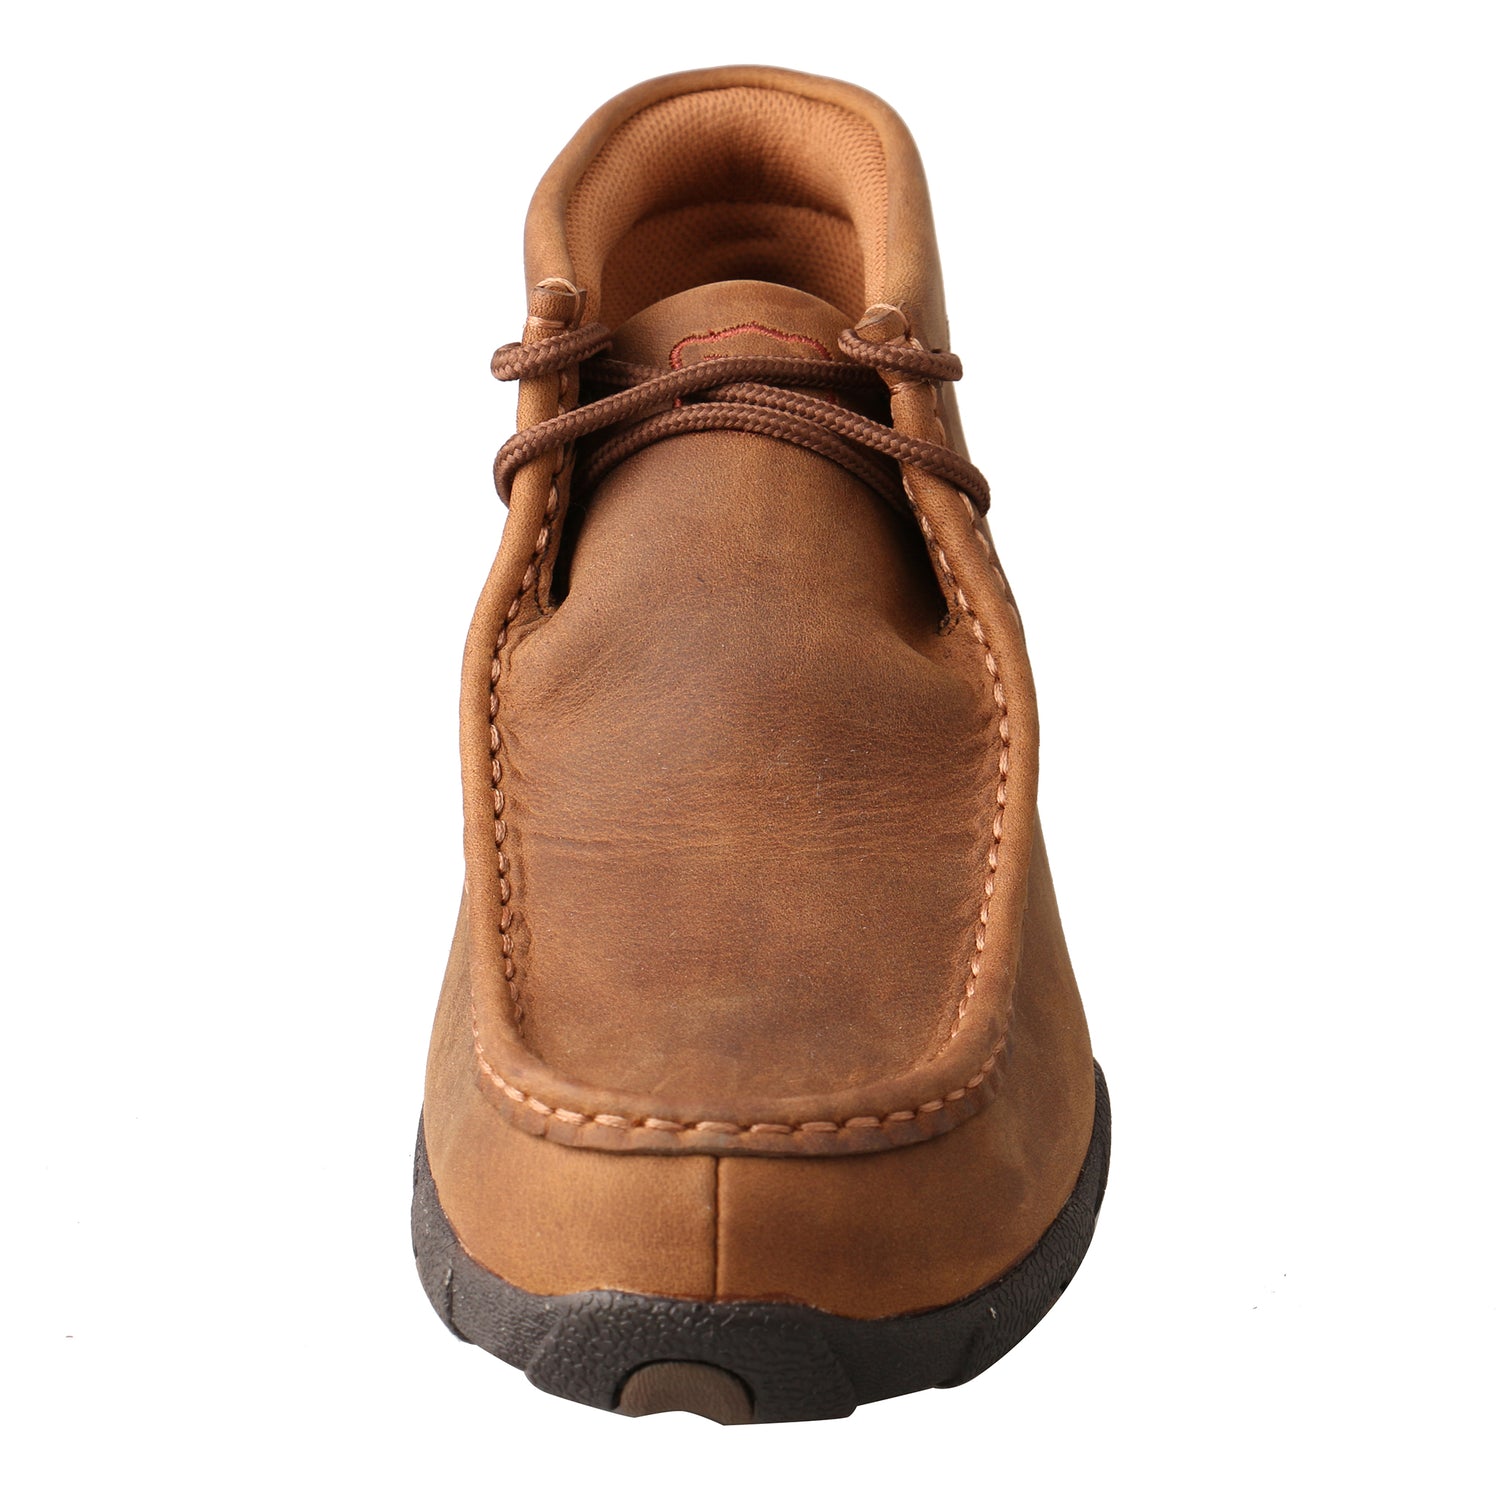 Picture of outside of Women's Twisted X Lace Up Soft Toe Work Chukka Driving Moc WDMW001